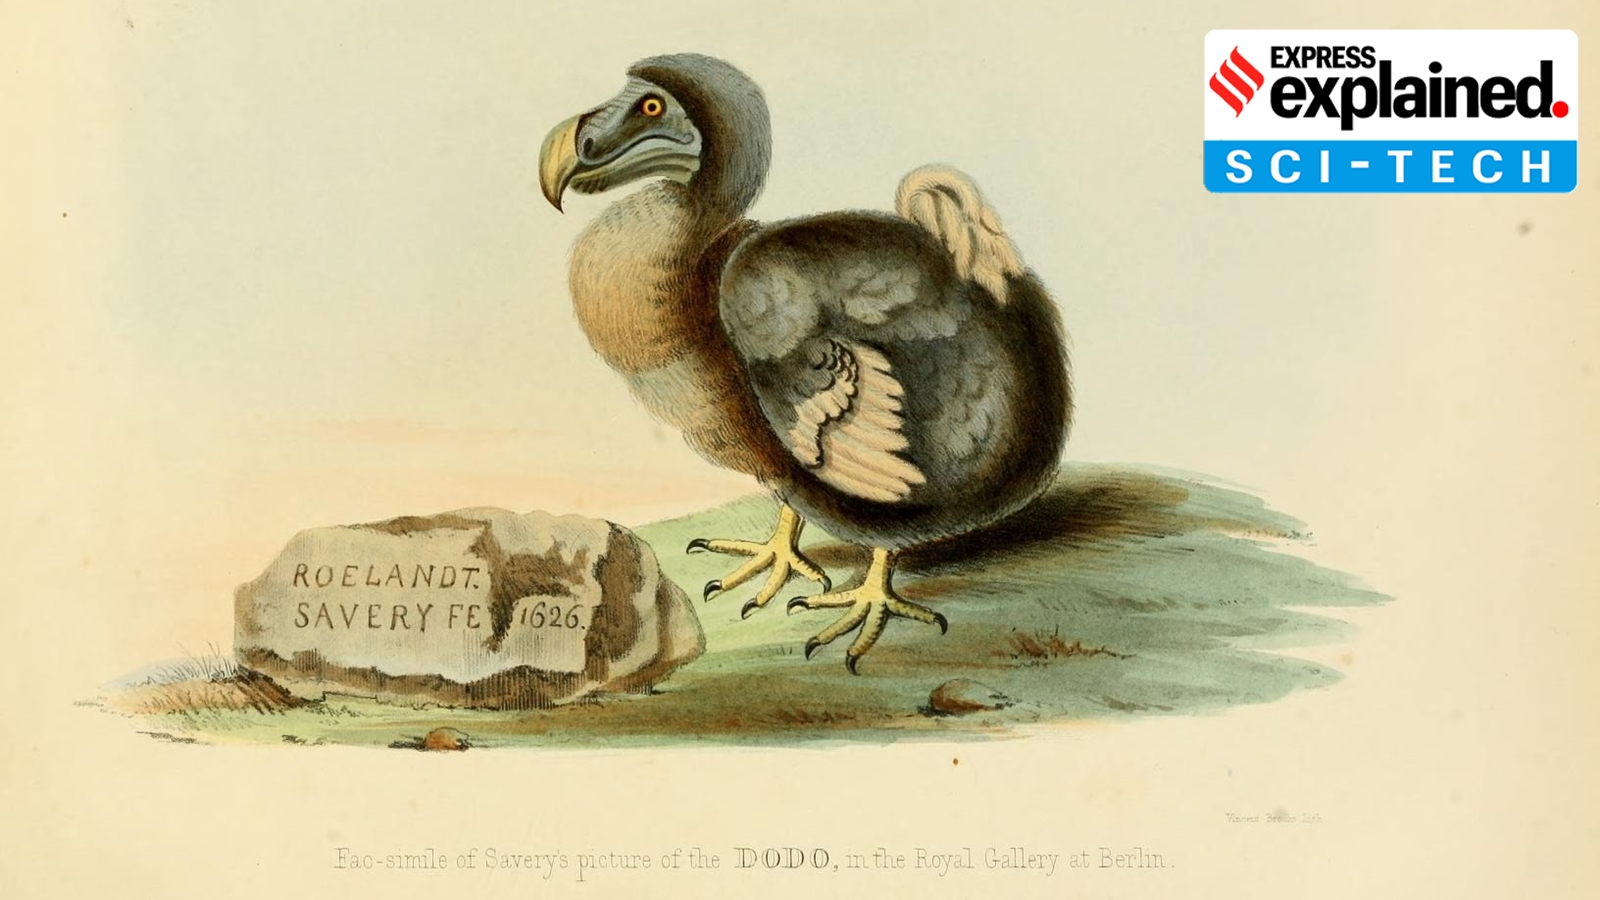 De-extincting the dodo: Why scientists are planning to bring back